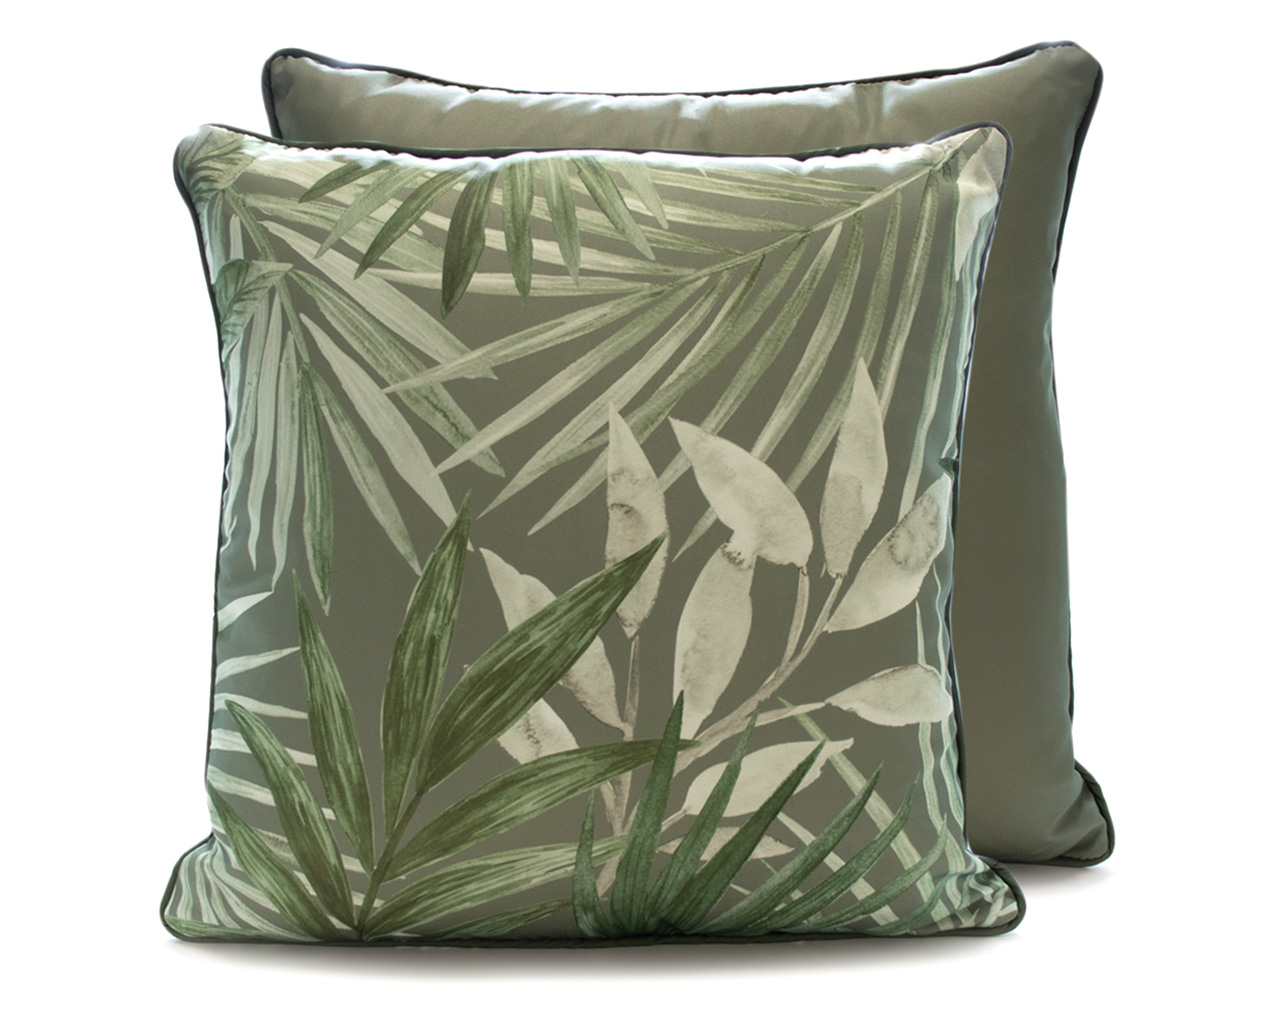 Madras Link Congolian Moss Green Outdoor Cushion - 50x50cm, , hi-res image number null